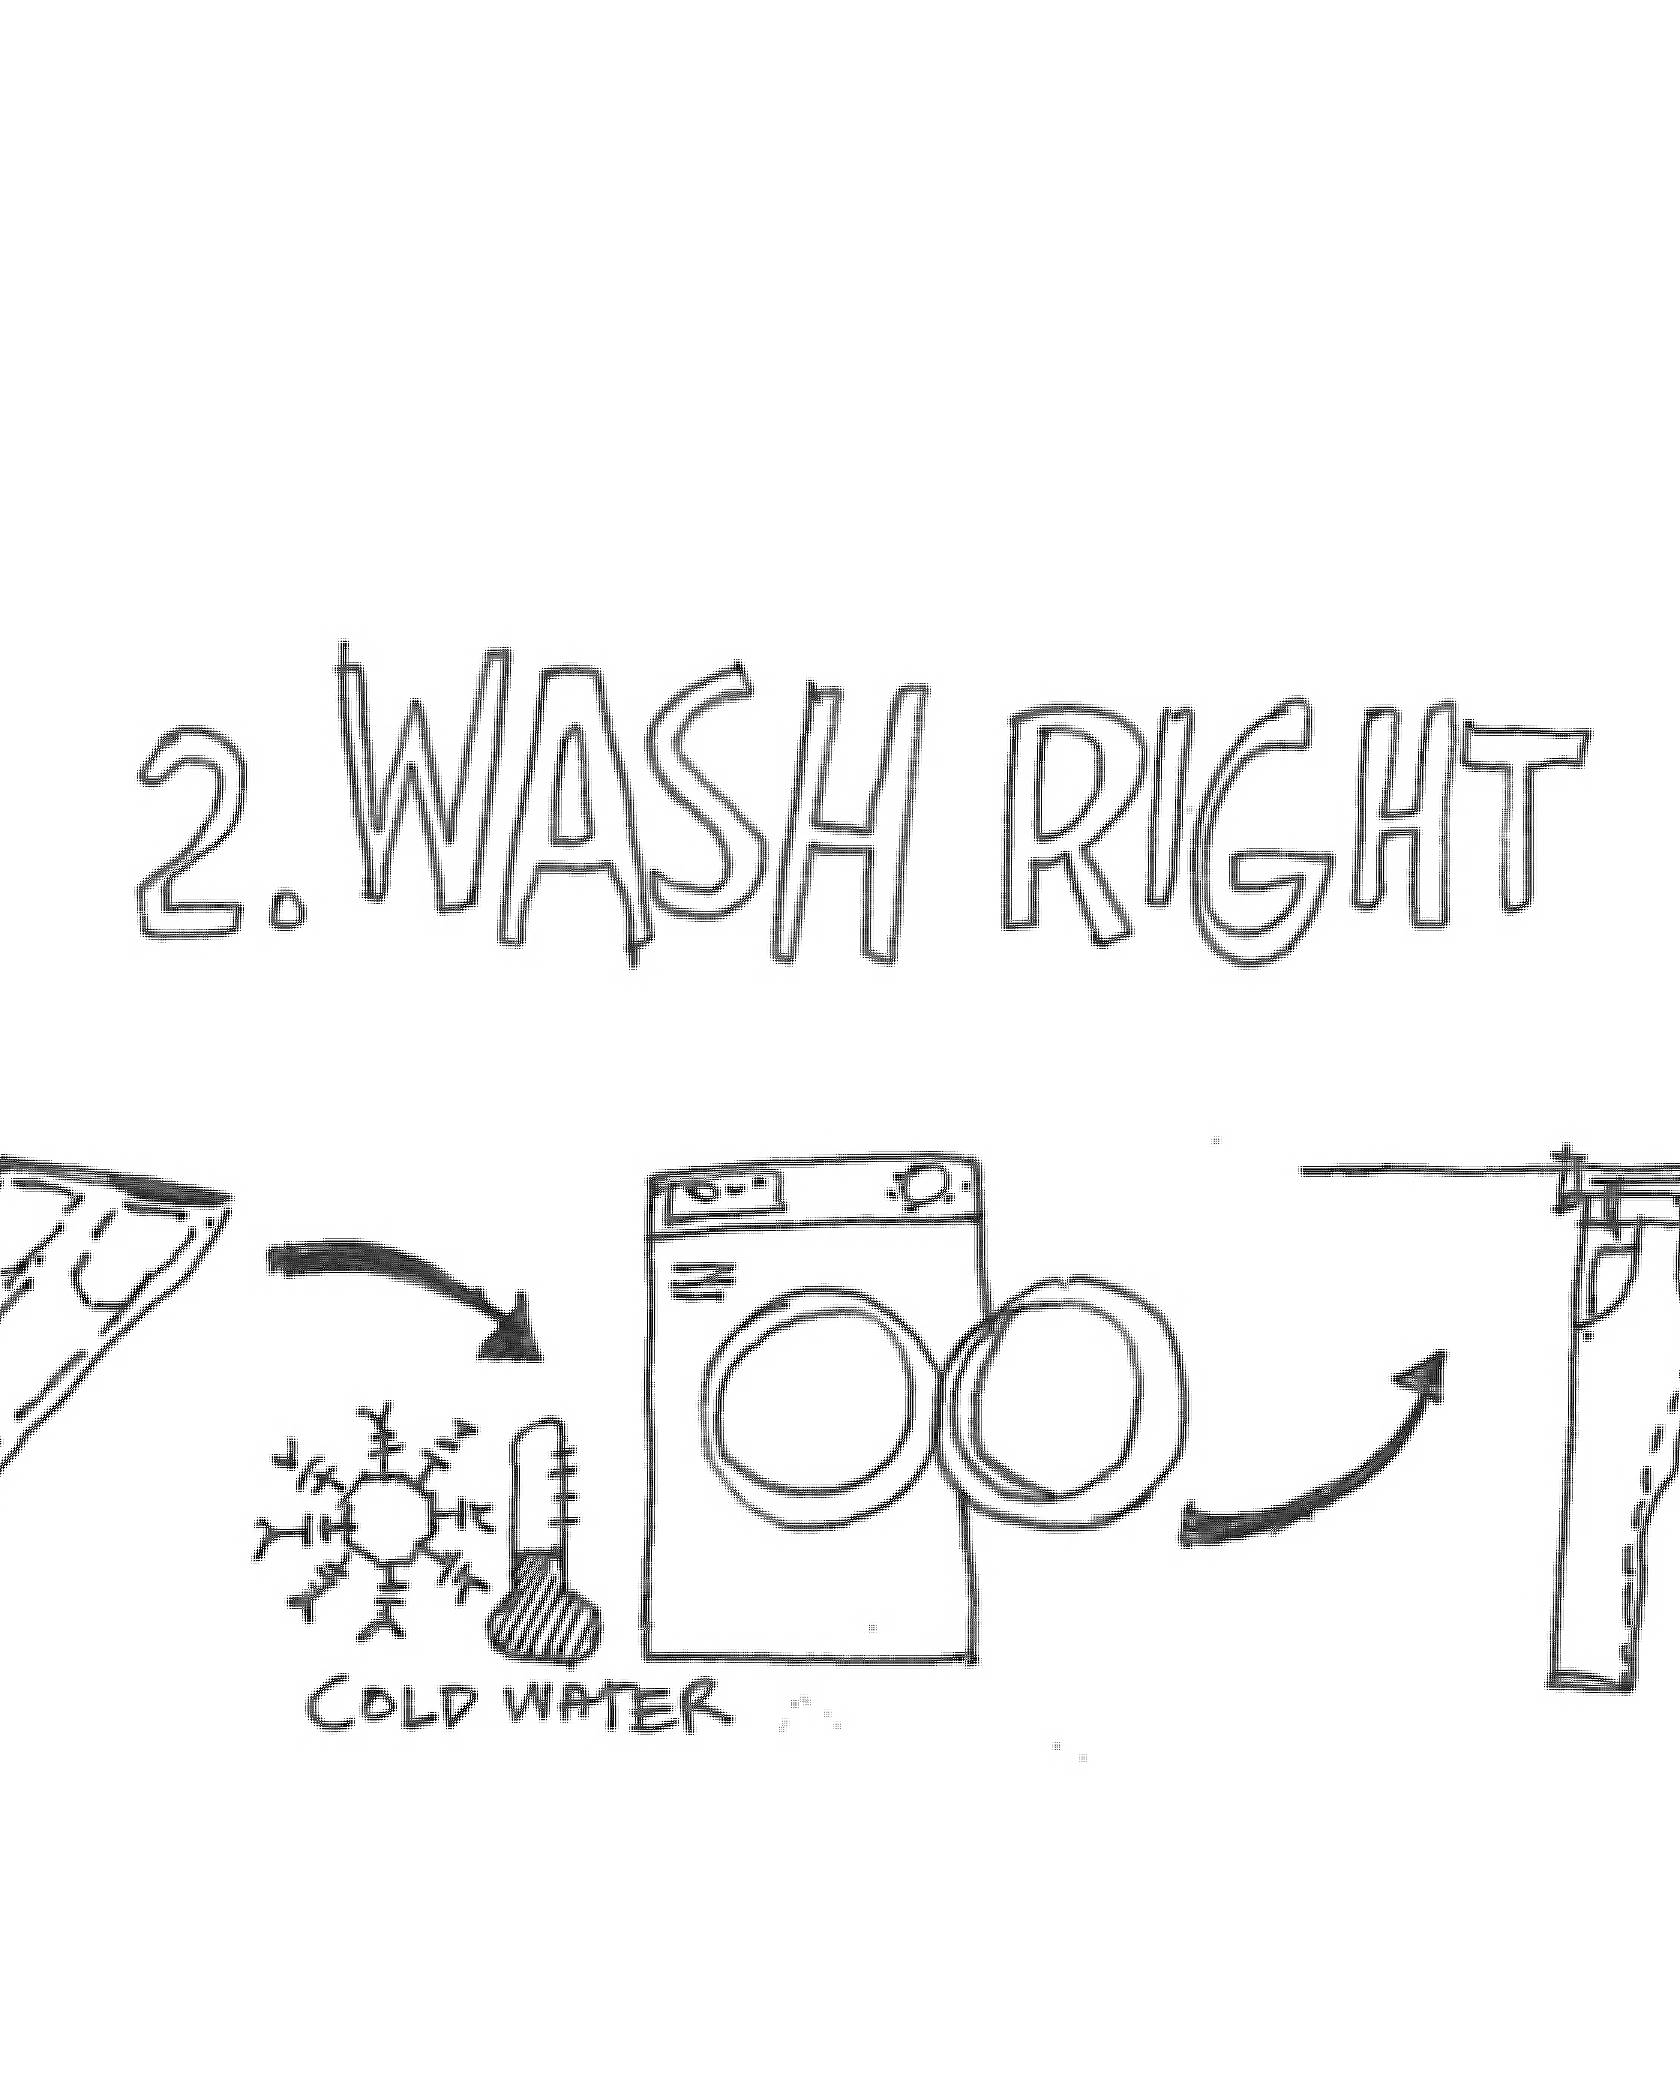 Header reading 2. WASH RIGHT. Below, there is an illustration of a pair of jeans with the text "turn inside out" followed by an illustration of a washer with the text "cold water" followed by an illustration of jeans hanging to dry with the text "hang dry."